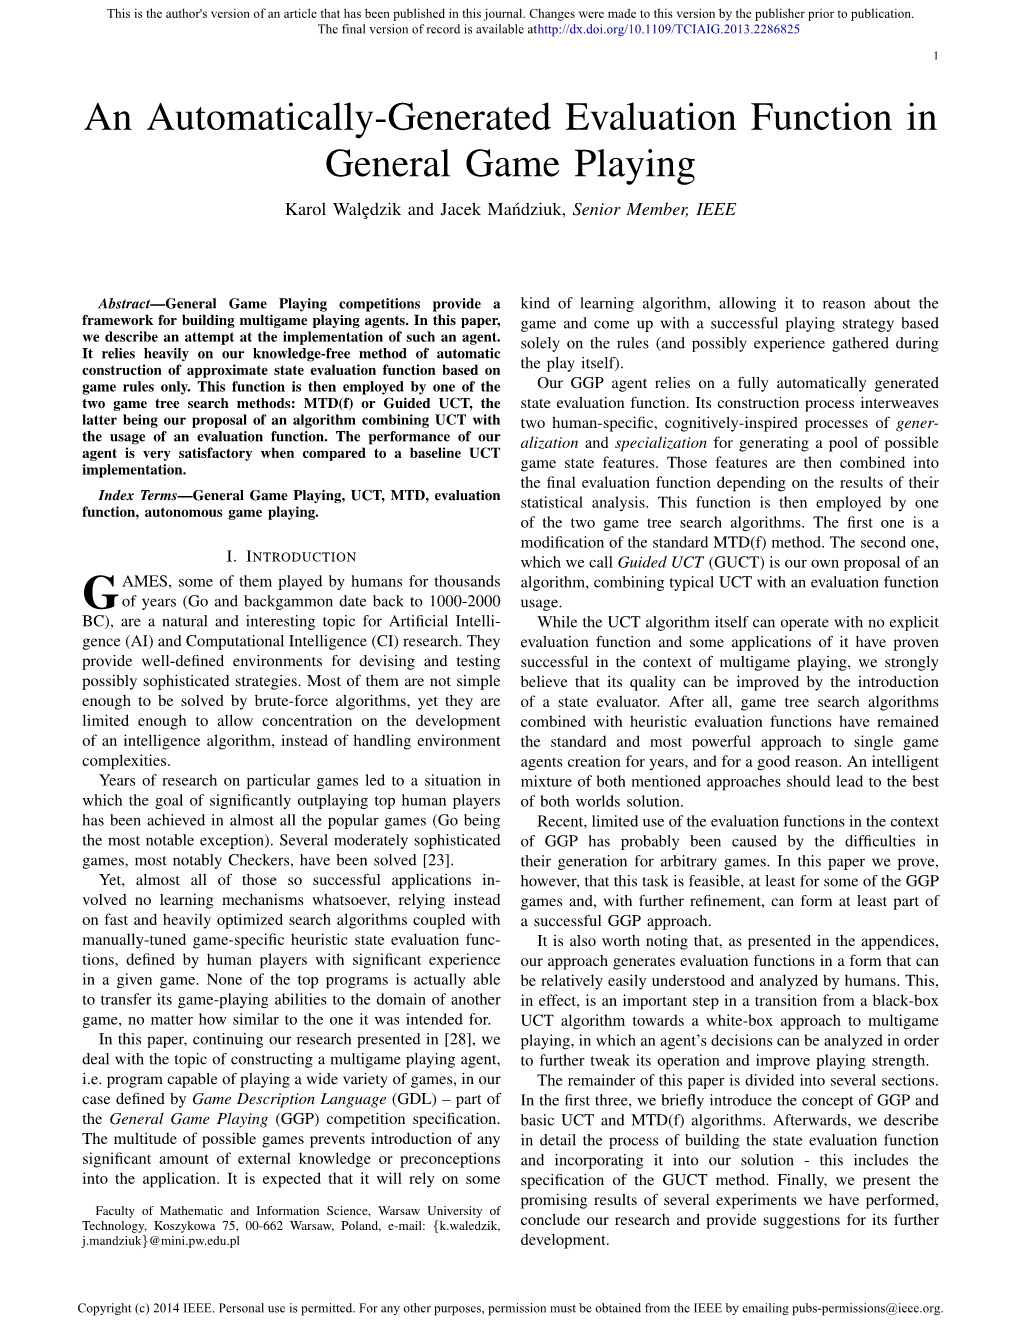 An Automatically-Generated Evaluation Function in General Game Playing Karol Wale¸Dzik and Jacek Mandziuk,´ Senior Member, IEEE